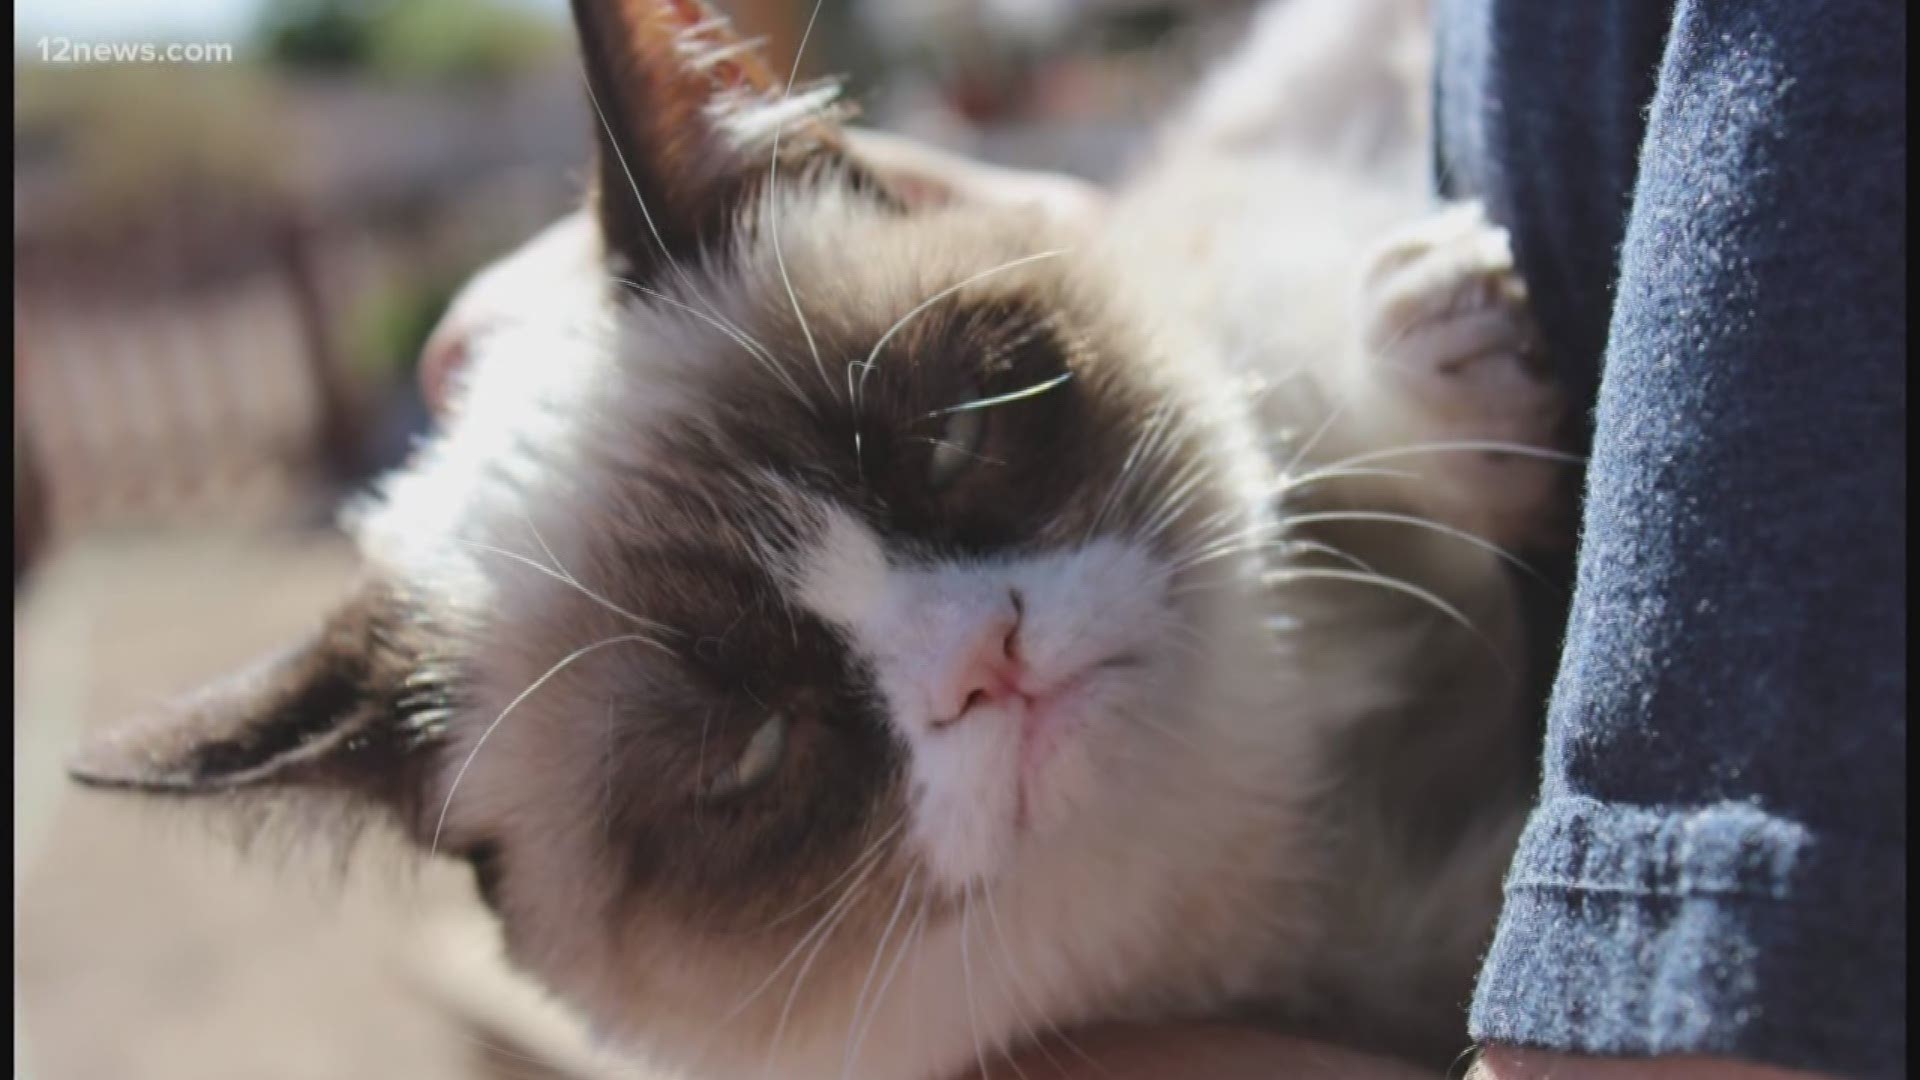 Did you know the internet's most famous cat, Grumpy Cat, was born and lived in Arizona? Sadly, she passed away on Friday. We take a look back at her seven-year career.